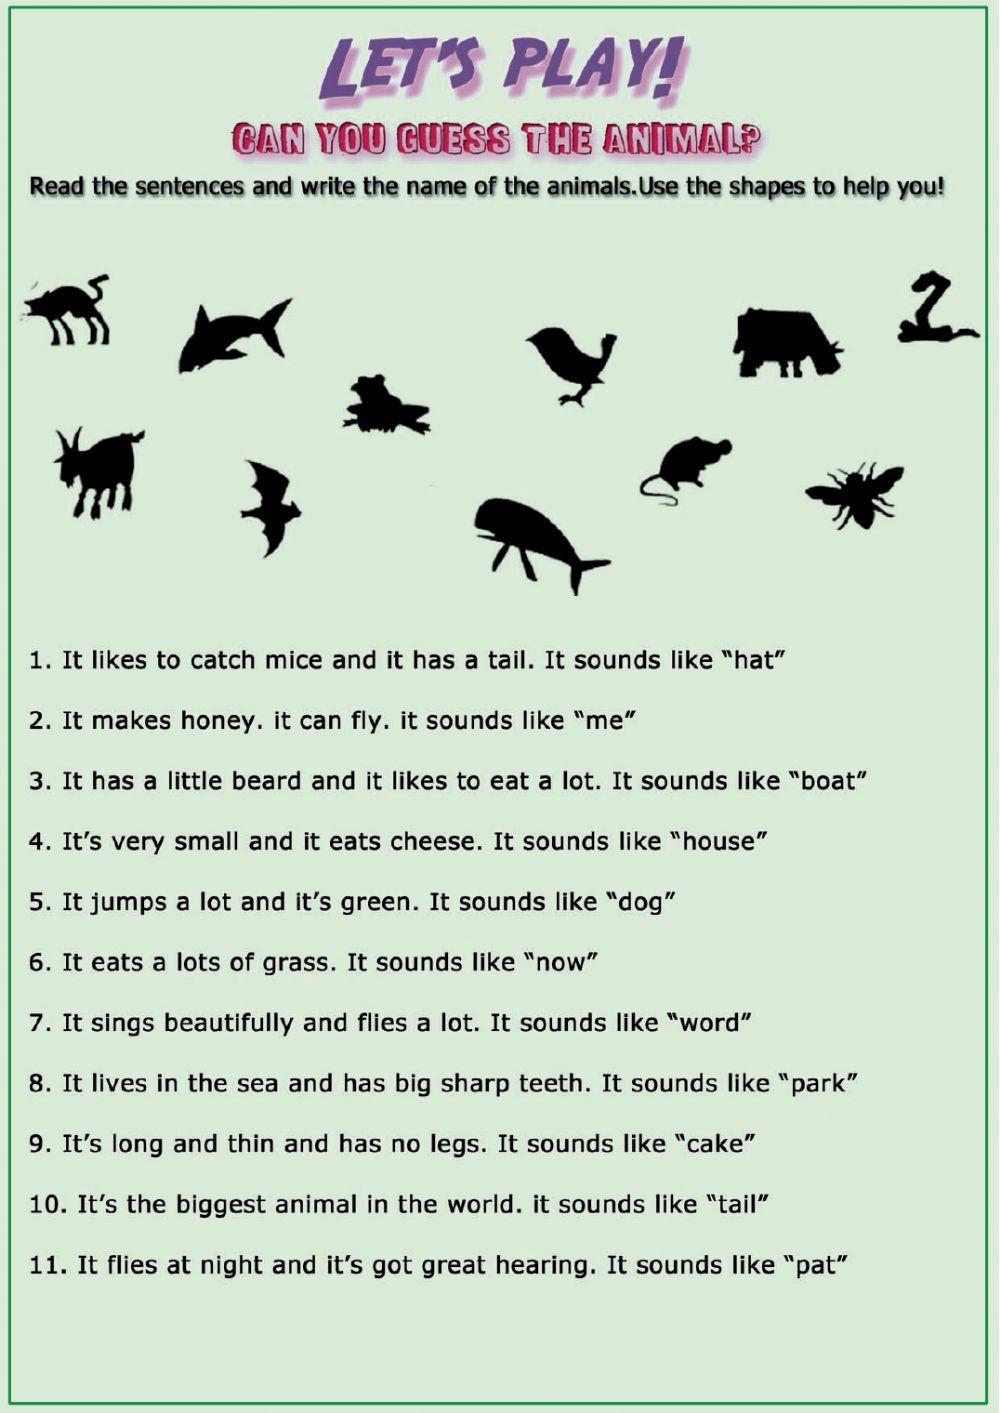 Animals guessing game